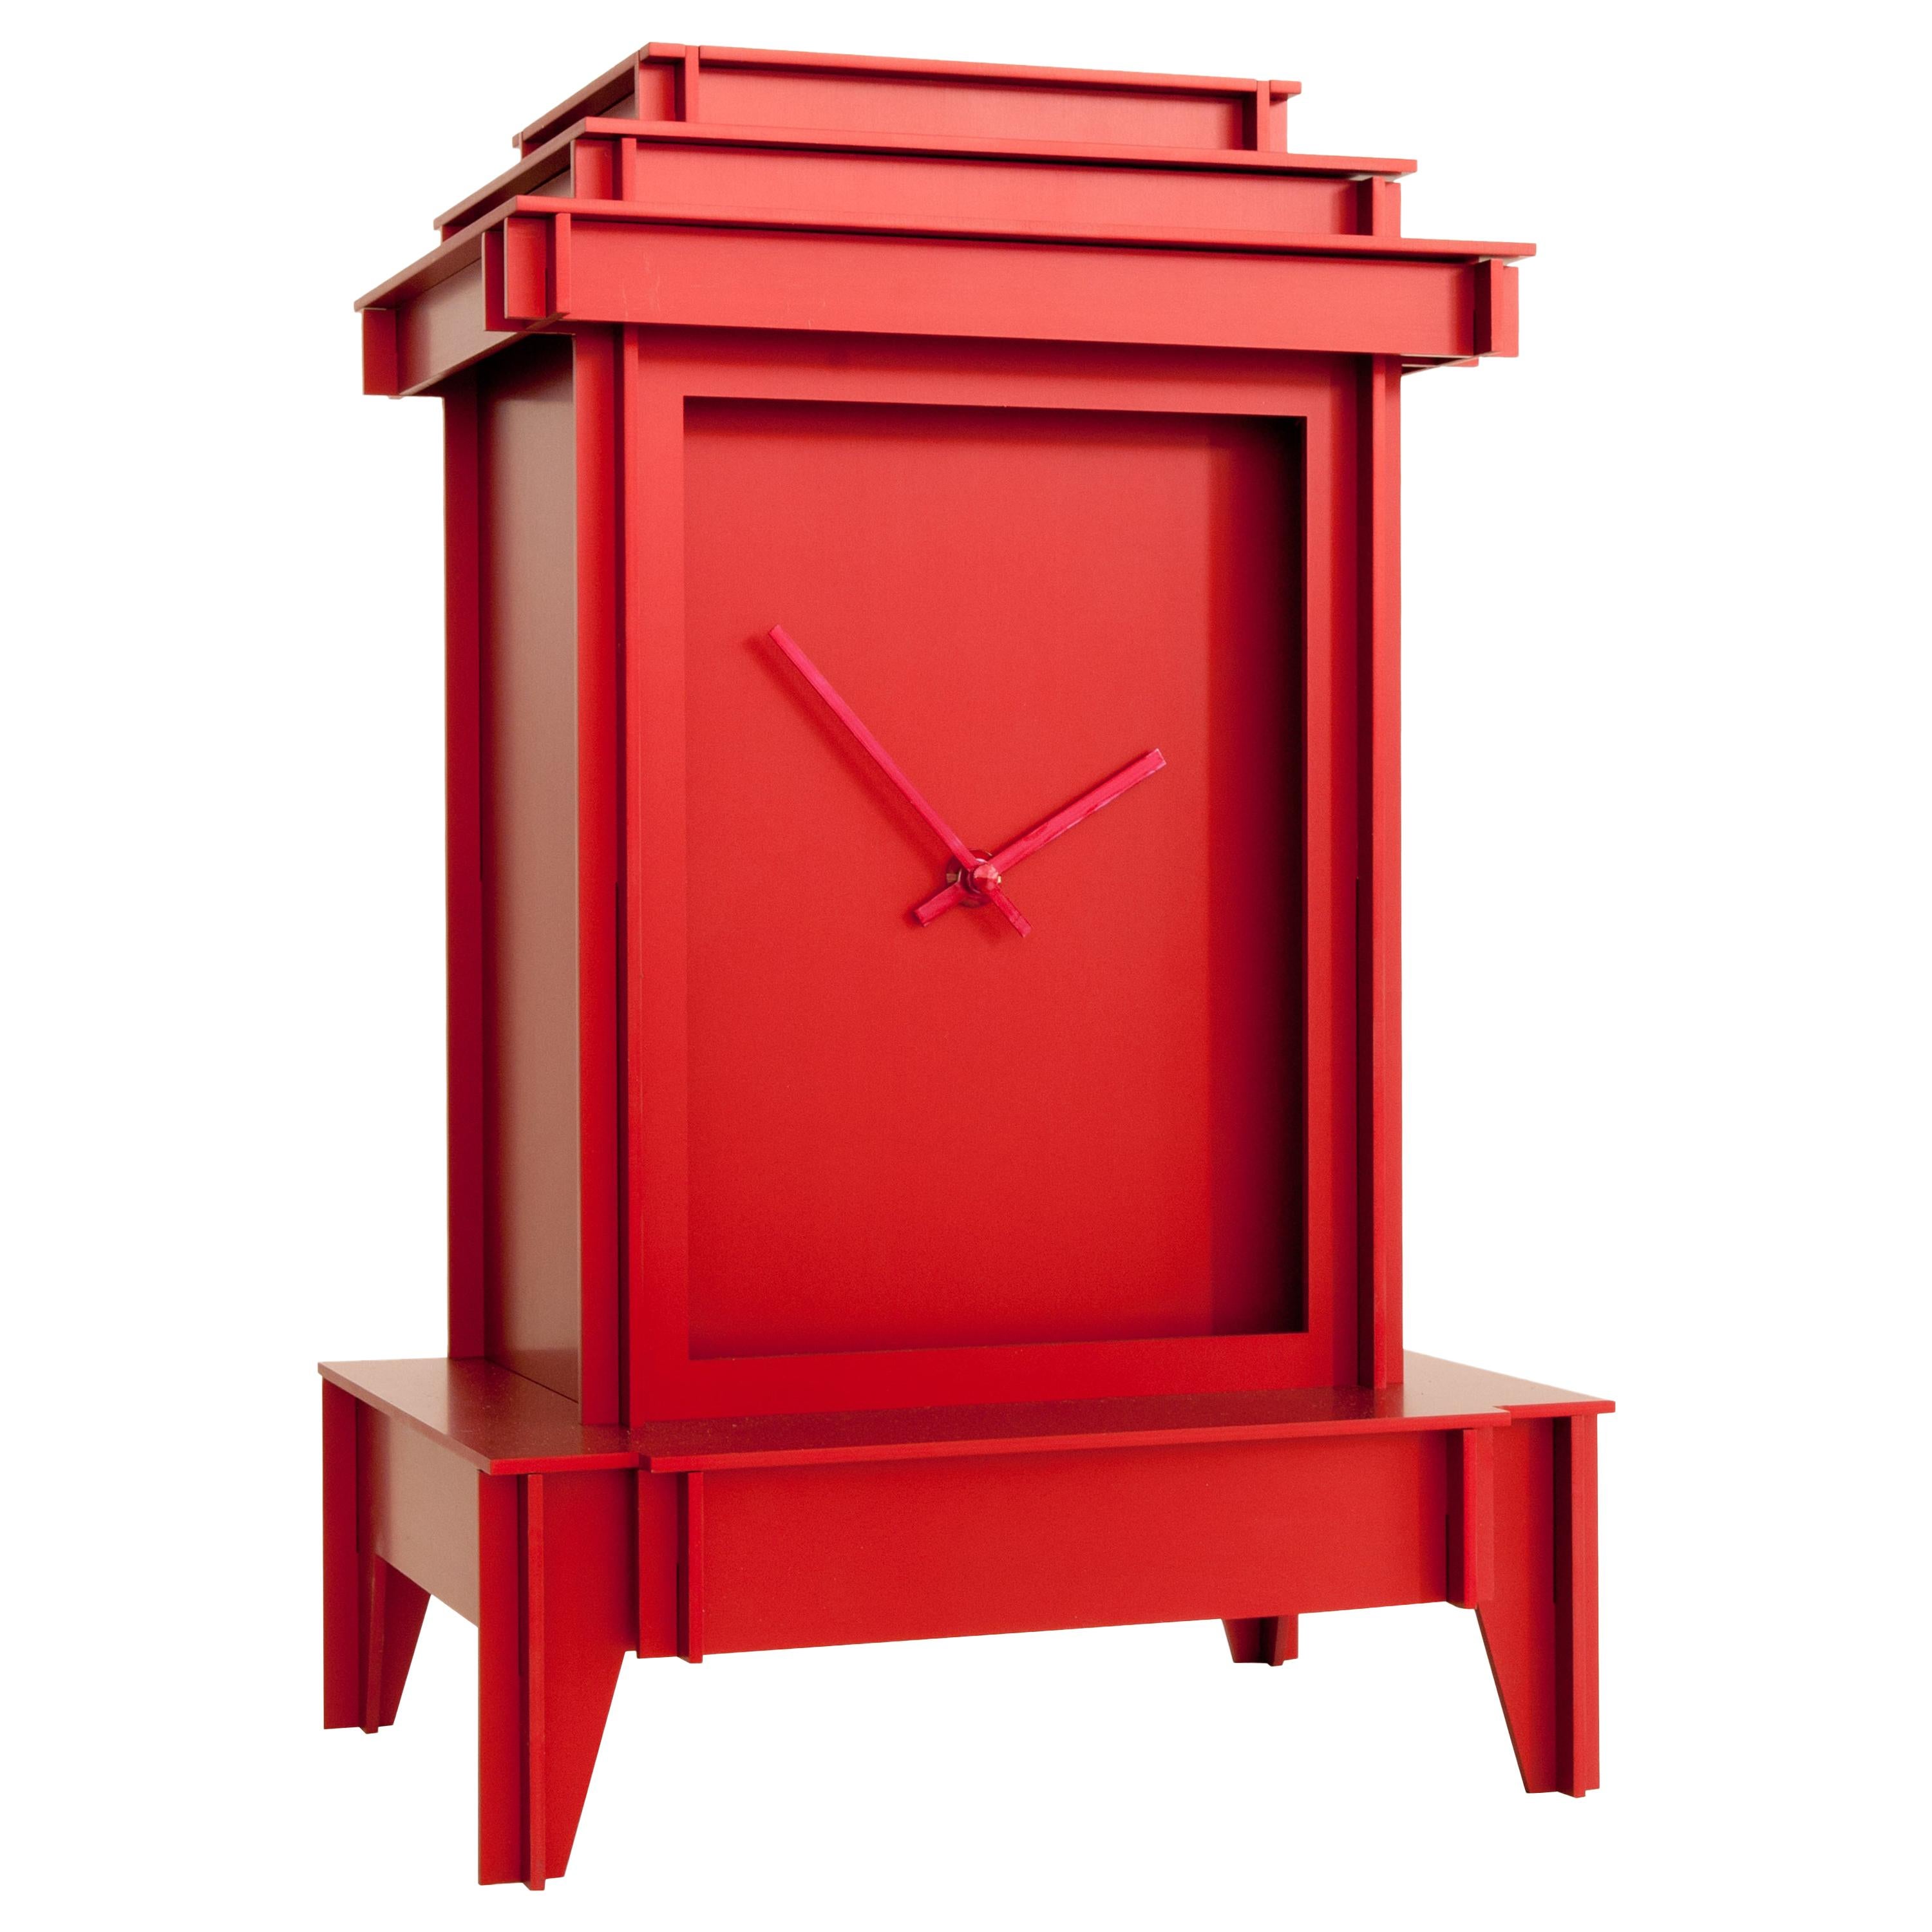 NSNG One More Time Clock Red